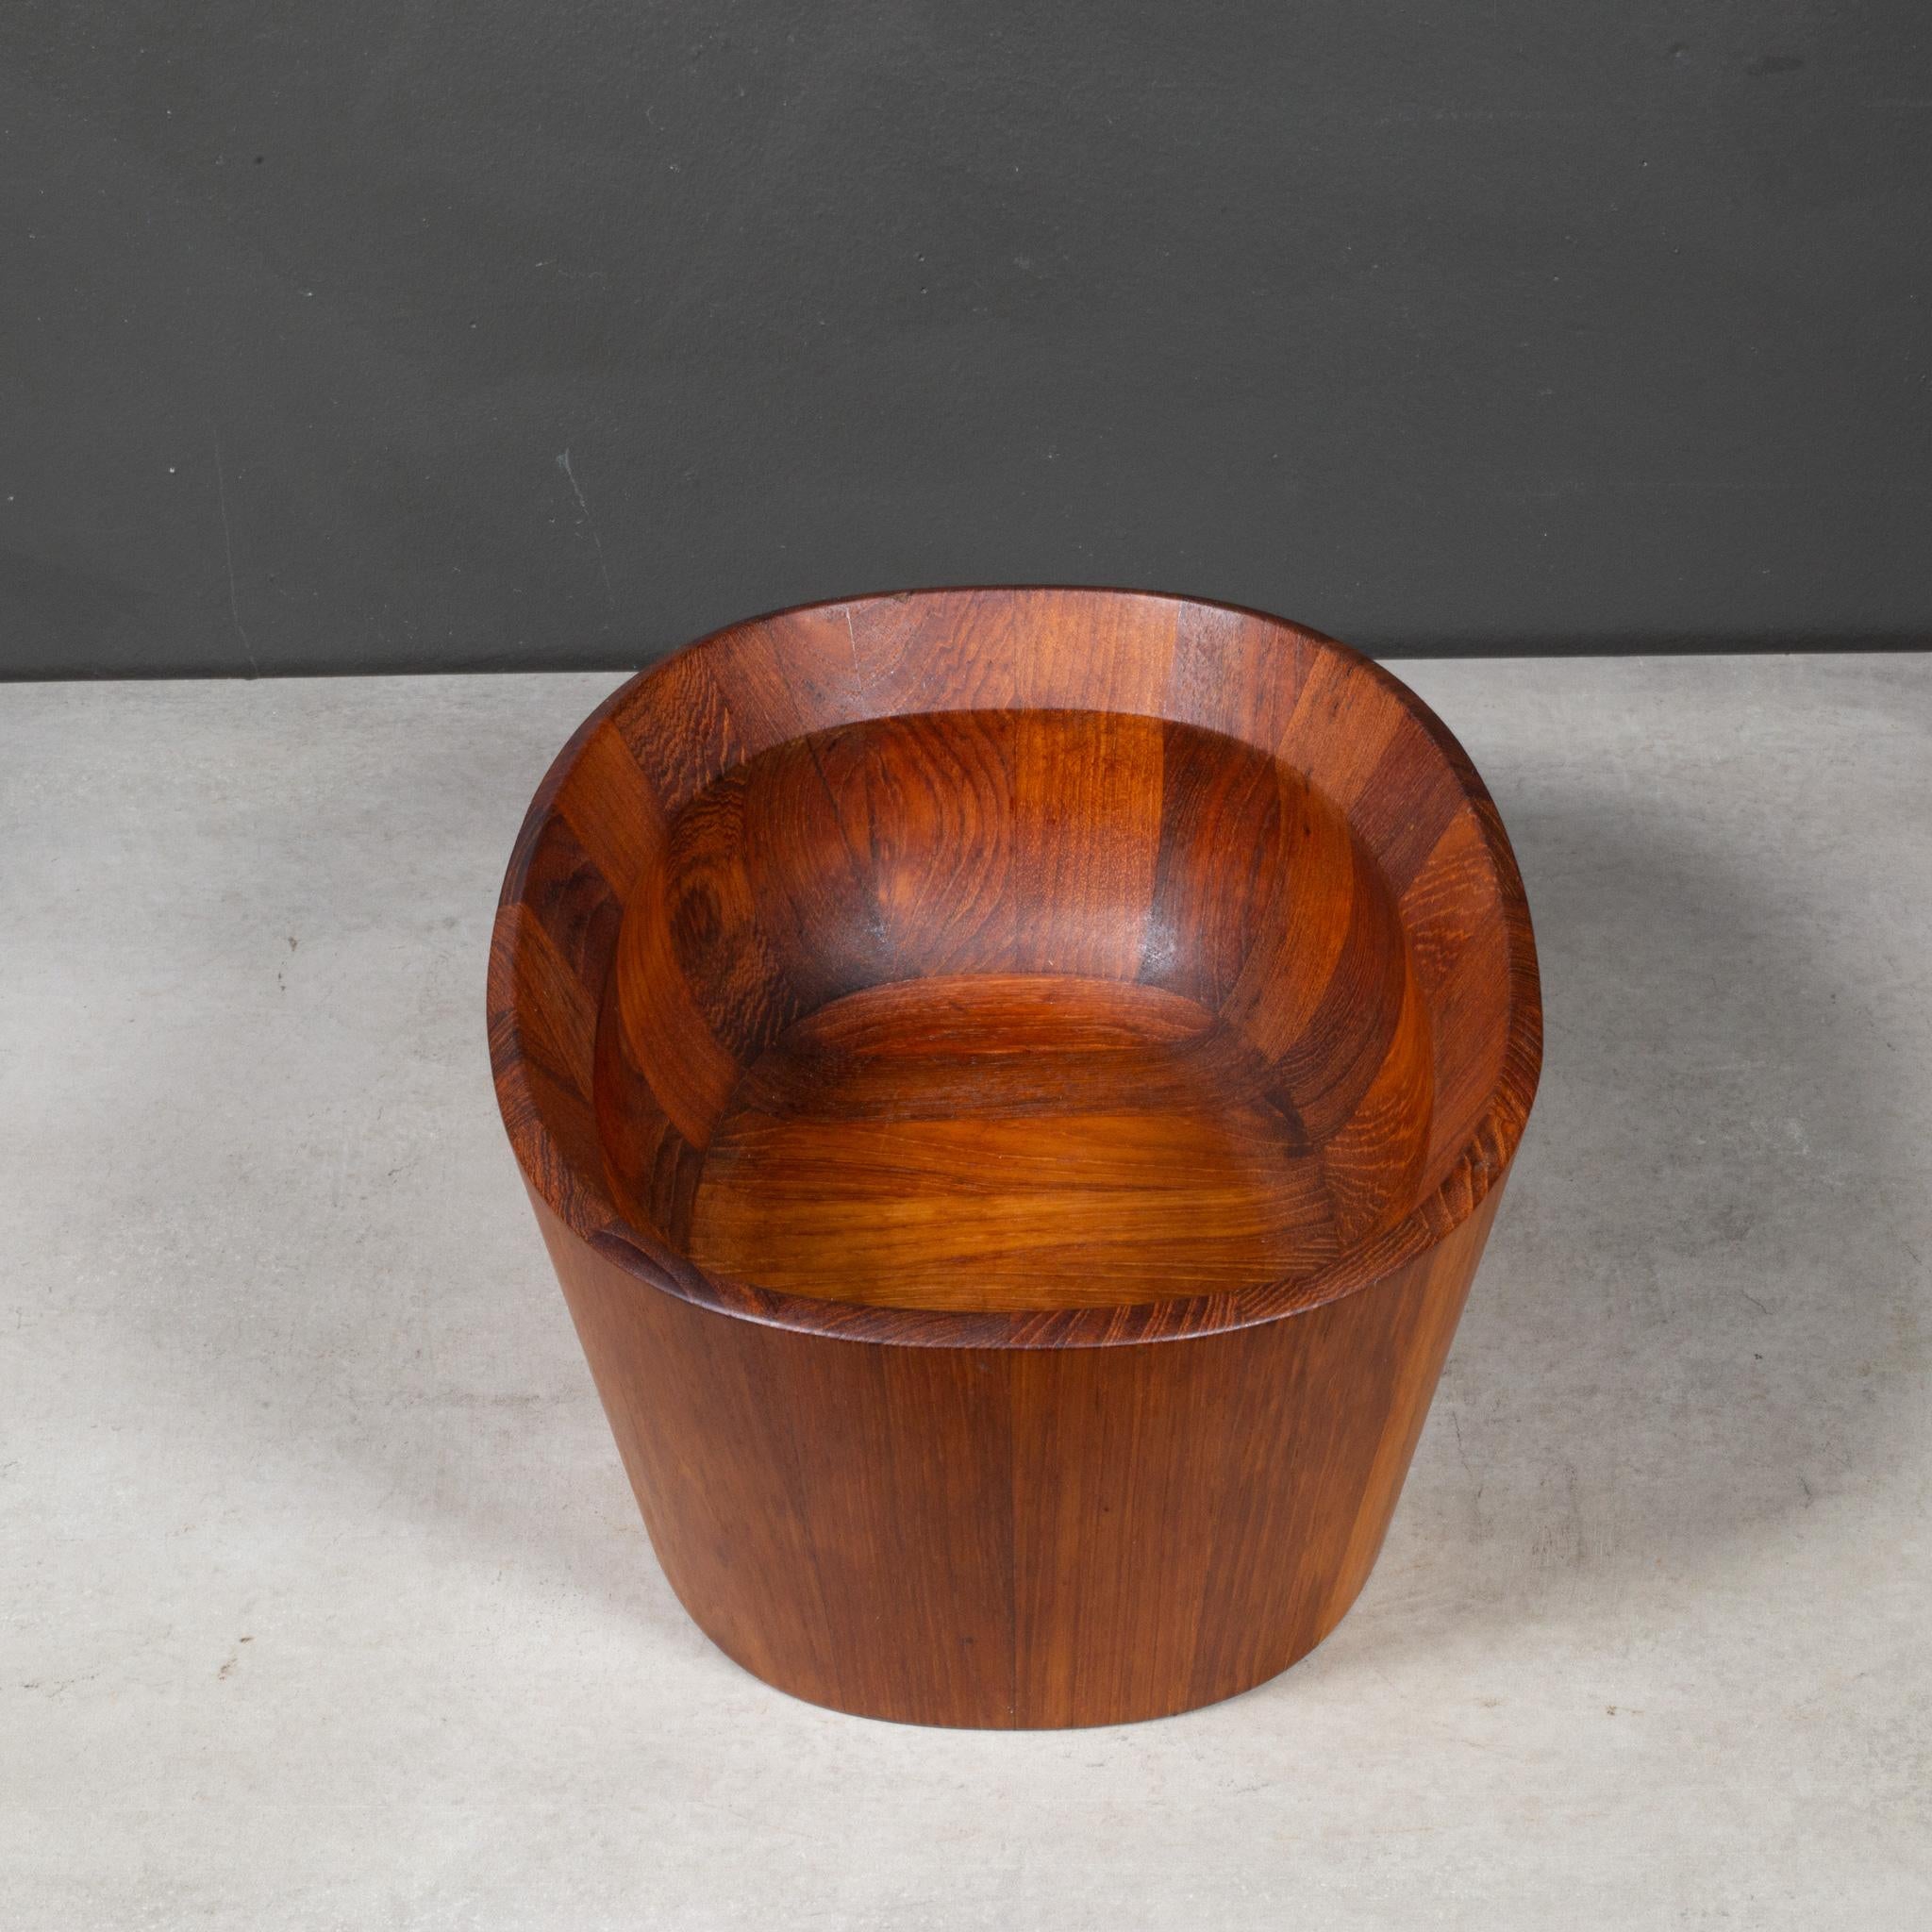  Mid-century Danish Jens Quistgaard Teak Dansk Oval Bowl c.1960 (FREE SHIPPING) In Good Condition For Sale In San Francisco, CA